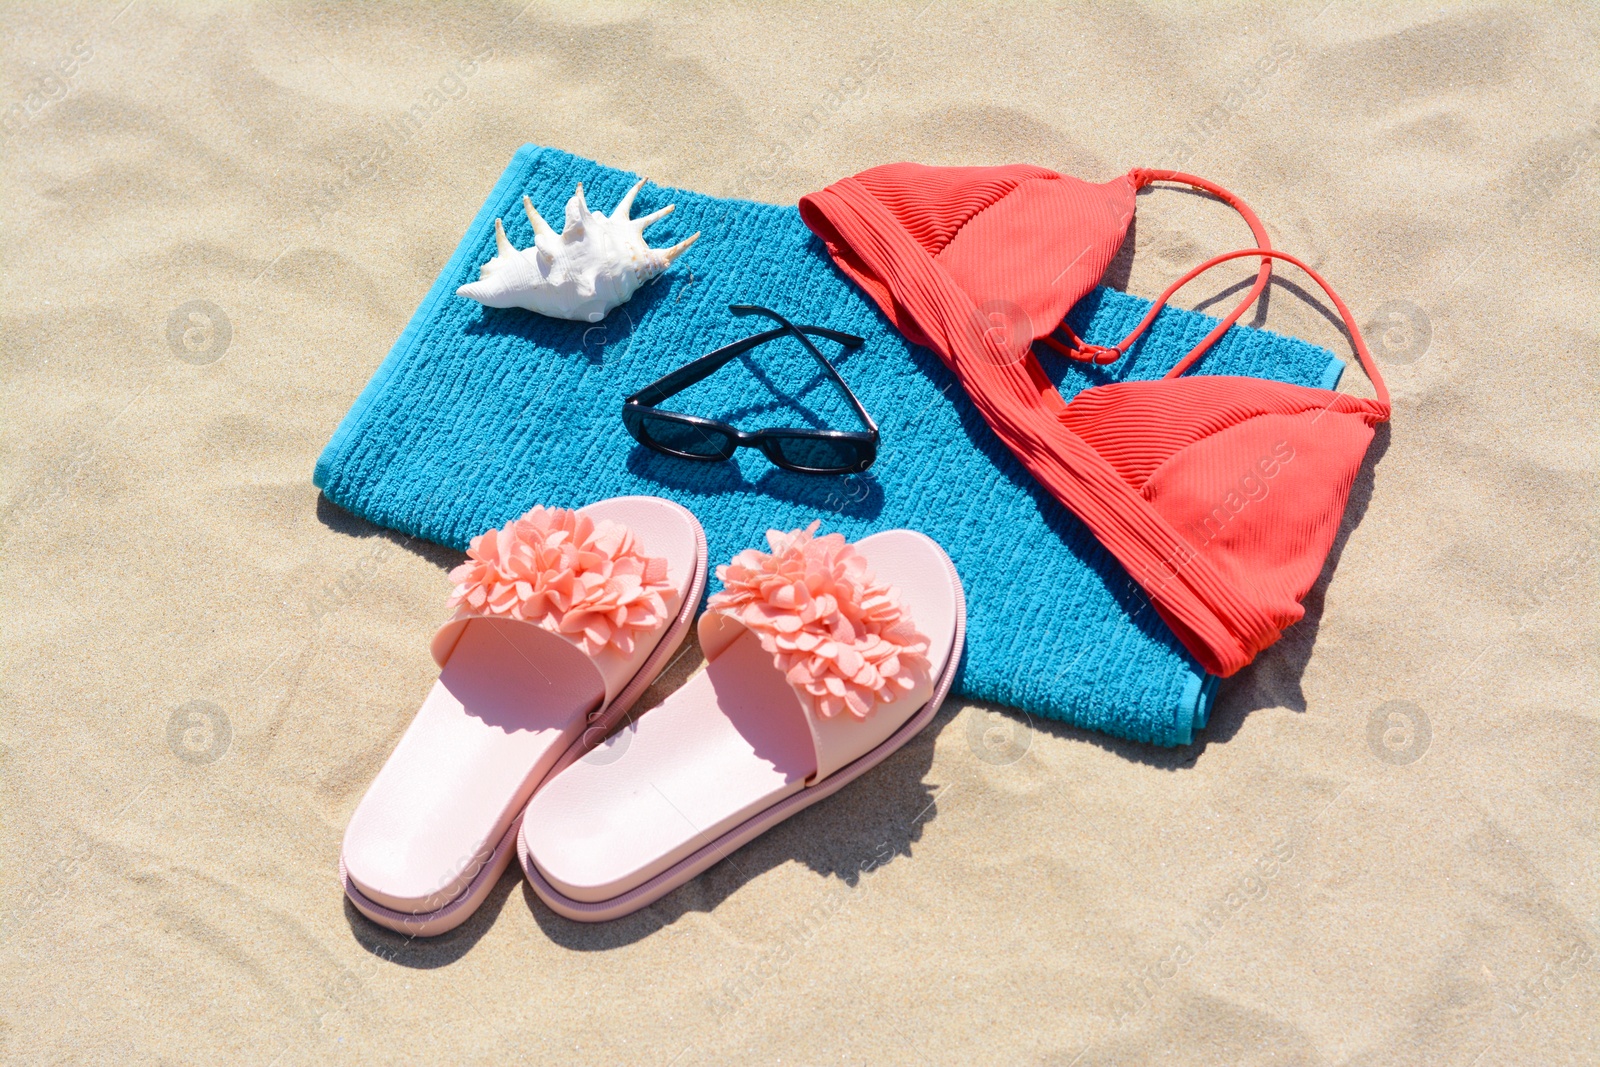 Photo of Towel, flip flops and bra on sand. Beach accessories